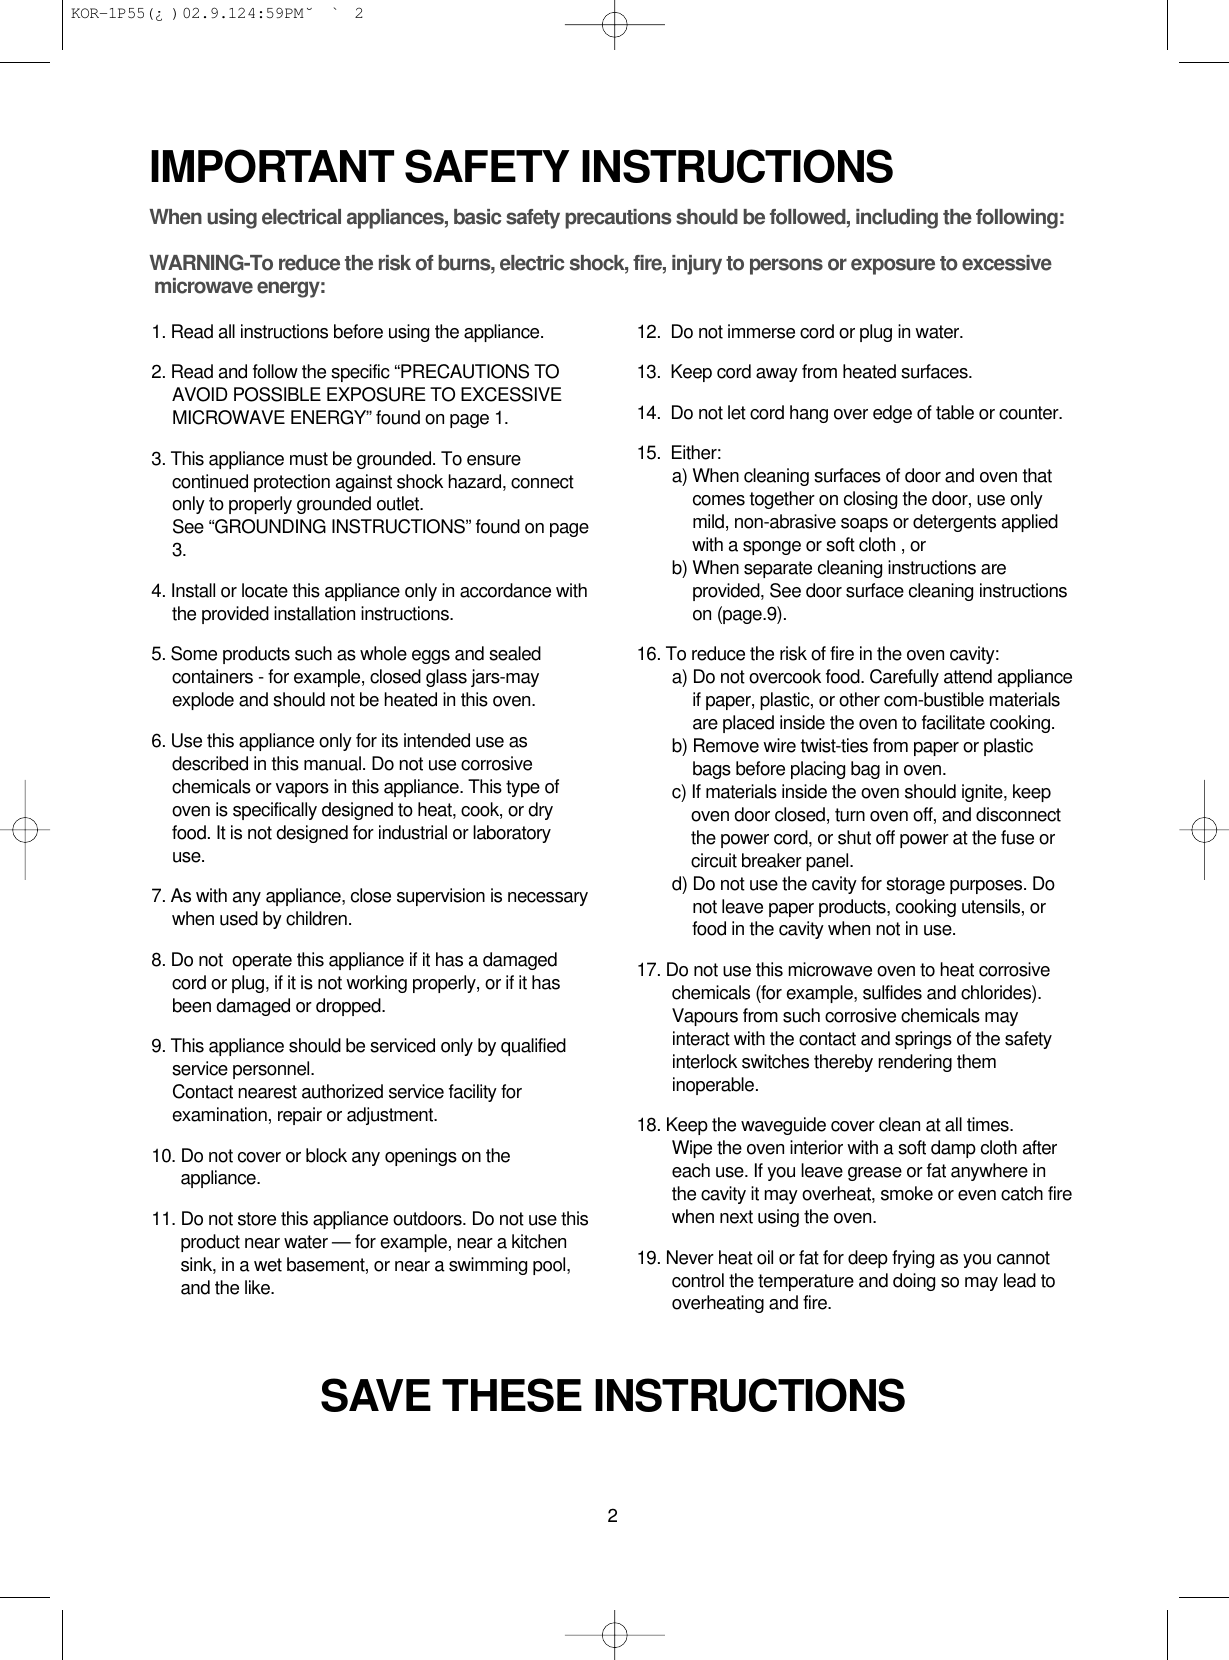 2IMPORTANT SAFETY INSTRUCTIONSSAVE THESE INSTRUCTIONSWhen using electrical appliances, basic safety precautions should be followed, including the following:WARNING-To reduce the risk of burns, electric shock, fire, injury to persons or exposure to excessive microwave energy:1. Read all instructions before using the appliance.2. Read and follow the specific “PRECAUTIONS TOAVOID POSSIBLE EXPOSURE TO EXCESSIVEMICROWAVE ENERGY” found on page 1.3. This appliance must be grounded. To ensurecontinued protection against shock hazard, connectonly to properly grounded outlet. See “GROUNDING INSTRUCTIONS” found on page3.4. Install or locate this appliance only in accordance withthe provided installation instructions.5. Some products such as whole eggs and sealedcontainers - for example, closed glass jars-mayexplode and should not be heated in this oven.6. Use this appliance only for its intended use asdescribed in this manual. Do not use corrosivechemicals or vapors in this appliance. This type ofoven is specifically designed to heat, cook, or dryfood. It is not designed for industrial or laboratoryuse.7. As with any appliance, close supervision is necessarywhen used by children.8. Do not  operate this appliance if it has a damagedcord or plug, if it is not working properly, or if it hasbeen damaged or dropped.9. This appliance should be serviced only by qualifiedservice personnel. Contact nearest authorized service facility forexamination, repair or adjustment.10. Do not cover or block any openings on theappliance. 11. Do not store this appliance outdoors. Do not use thisproduct near water — for example, near a kitchensink, in a wet basement, or near a swimming pool,and the like.12.  Do not immerse cord or plug in water.13.  Keep cord away from heated surfaces.14.  Do not let cord hang over edge of table or counter.15.  Either:a) When cleaning surfaces of door and oven thatcomes together on closing the door, use onlymild, non-abrasive soaps or detergents appliedwith a sponge or soft cloth , orb) When separate cleaning instructions areprovided, See door surface cleaning instructionson (page.9).16. To reduce the risk of fire in the oven cavity:a) Do not overcook food. Carefully attend applianceif paper, plastic, or other com-bustible materialsare placed inside the oven to facilitate cooking.b) Remove wire twist-ties from paper or plasticbags before placing bag in oven.c) If materials inside the oven should ignite, keepoven door closed, turn oven off, and disconnectthe power cord, or shut off power at the fuse orcircuit breaker panel.d) Do not use the cavity for storage purposes. Donot leave paper products, cooking utensils, orfood in the cavity when not in use.17. Do not use this microwave oven to heat corrosivechemicals (for example, sulfides and chlorides).Vapours from such corrosive chemicals mayinteract with the contact and springs of the safetyinterlock switches thereby rendering theminoperable.18. Keep the waveguide cover clean at all times.Wipe the oven interior with a soft damp cloth aftereach use. If you leave grease or fat anywhere inthe cavity it may overheat, smoke or even catch firewhen next using the oven.19. Never heat oil or fat for deep frying as you cannotcontrol the temperature and doing so may lead tooverheating and fire. KOR-1P55(¿ )  02.9.12 4:59 PM  ˘`2